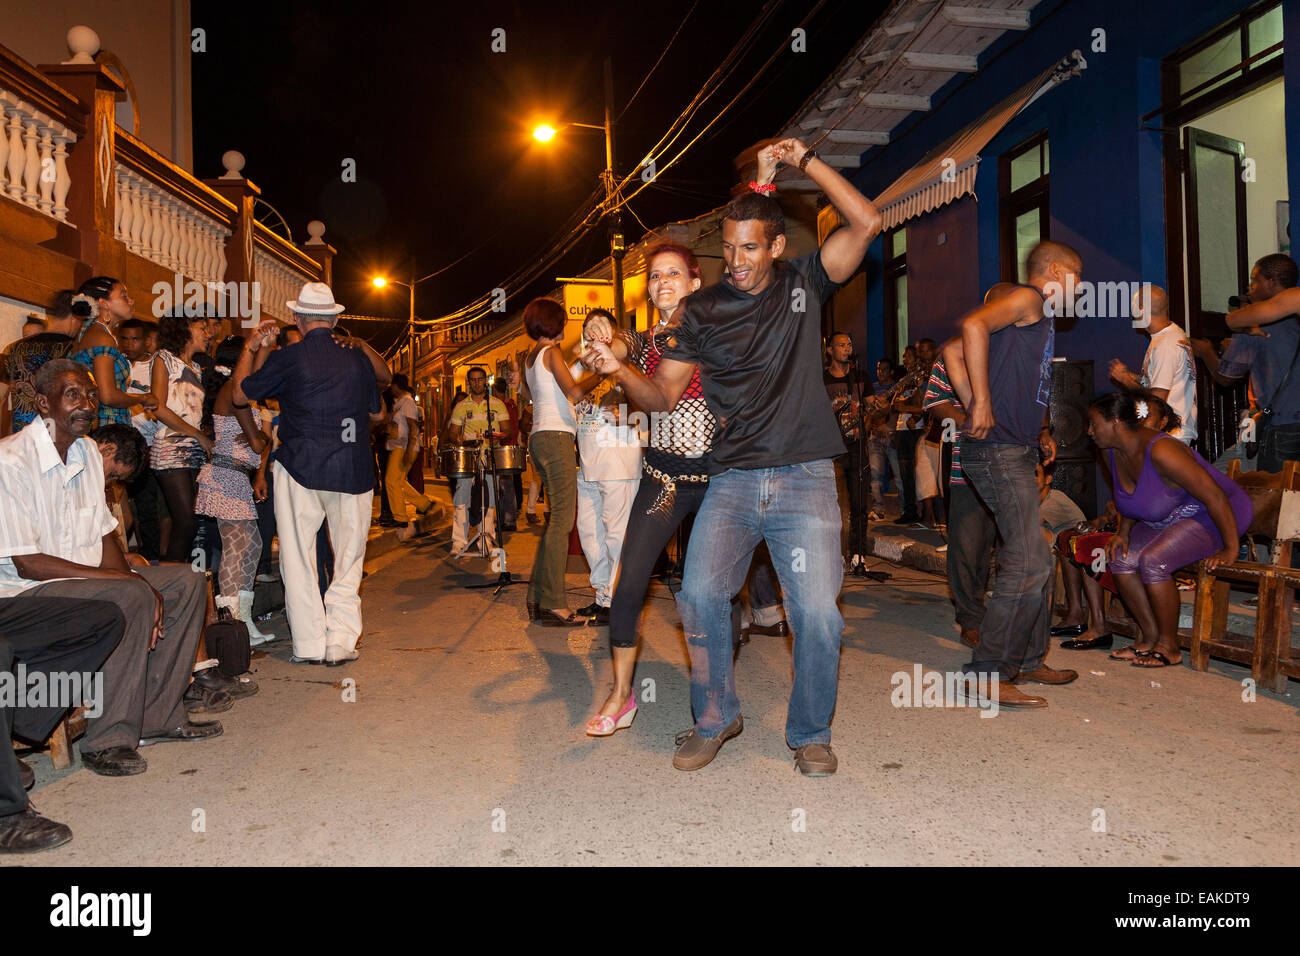 Music and dancing in the street, in the evening, Baracoa, Cuba Stock Photo